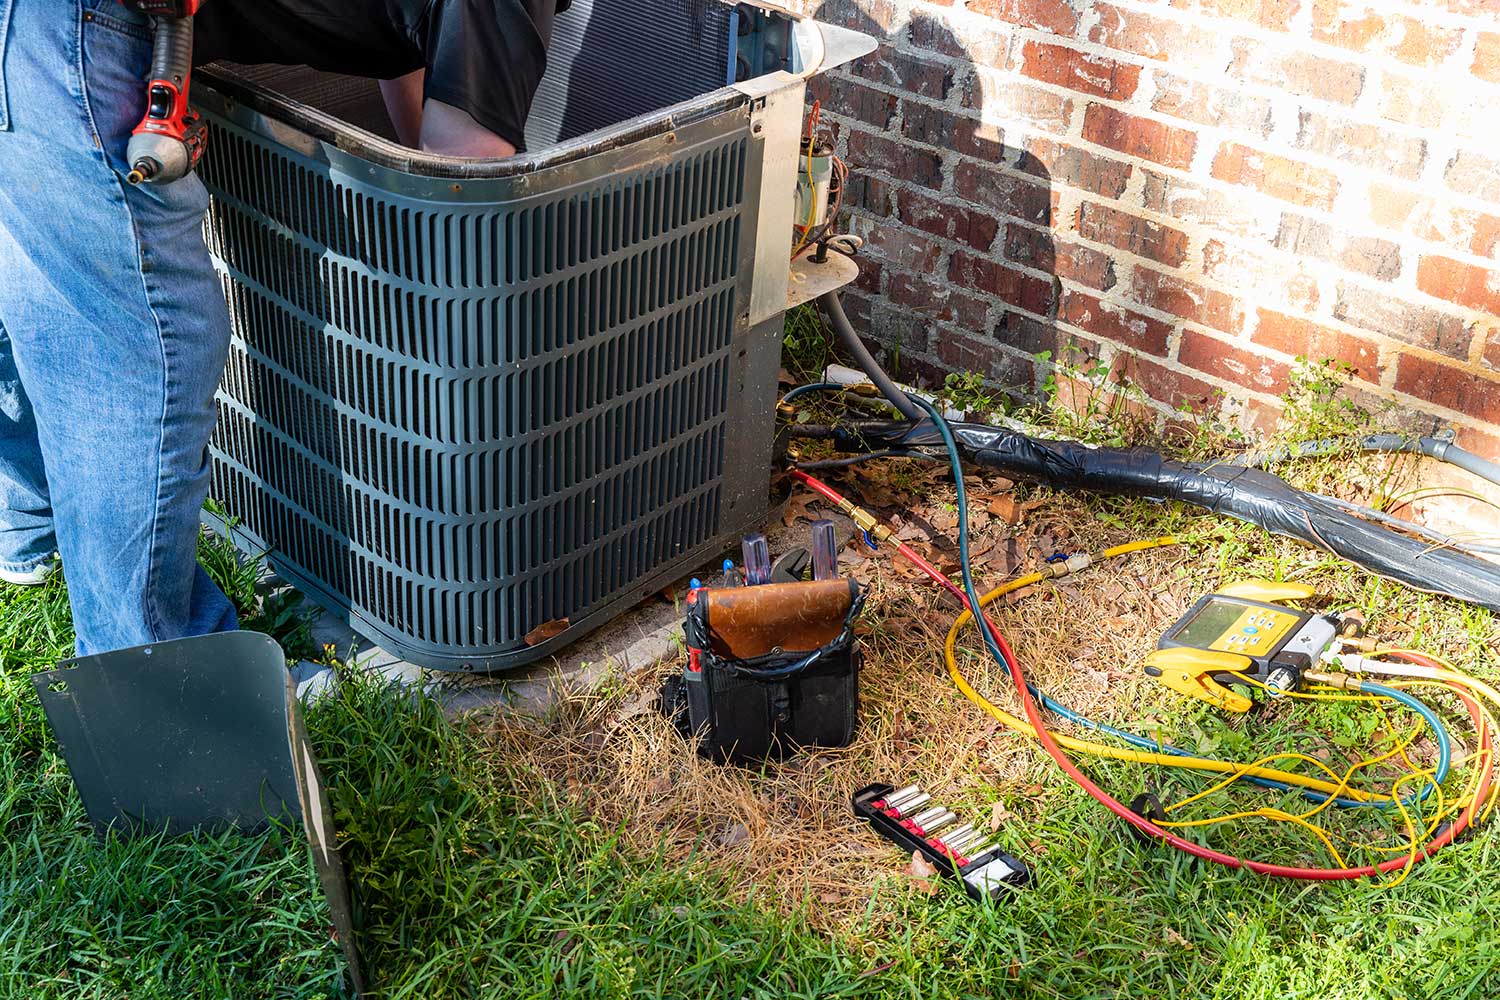 Some deciding factors when installing a brand new HVAC system into your home